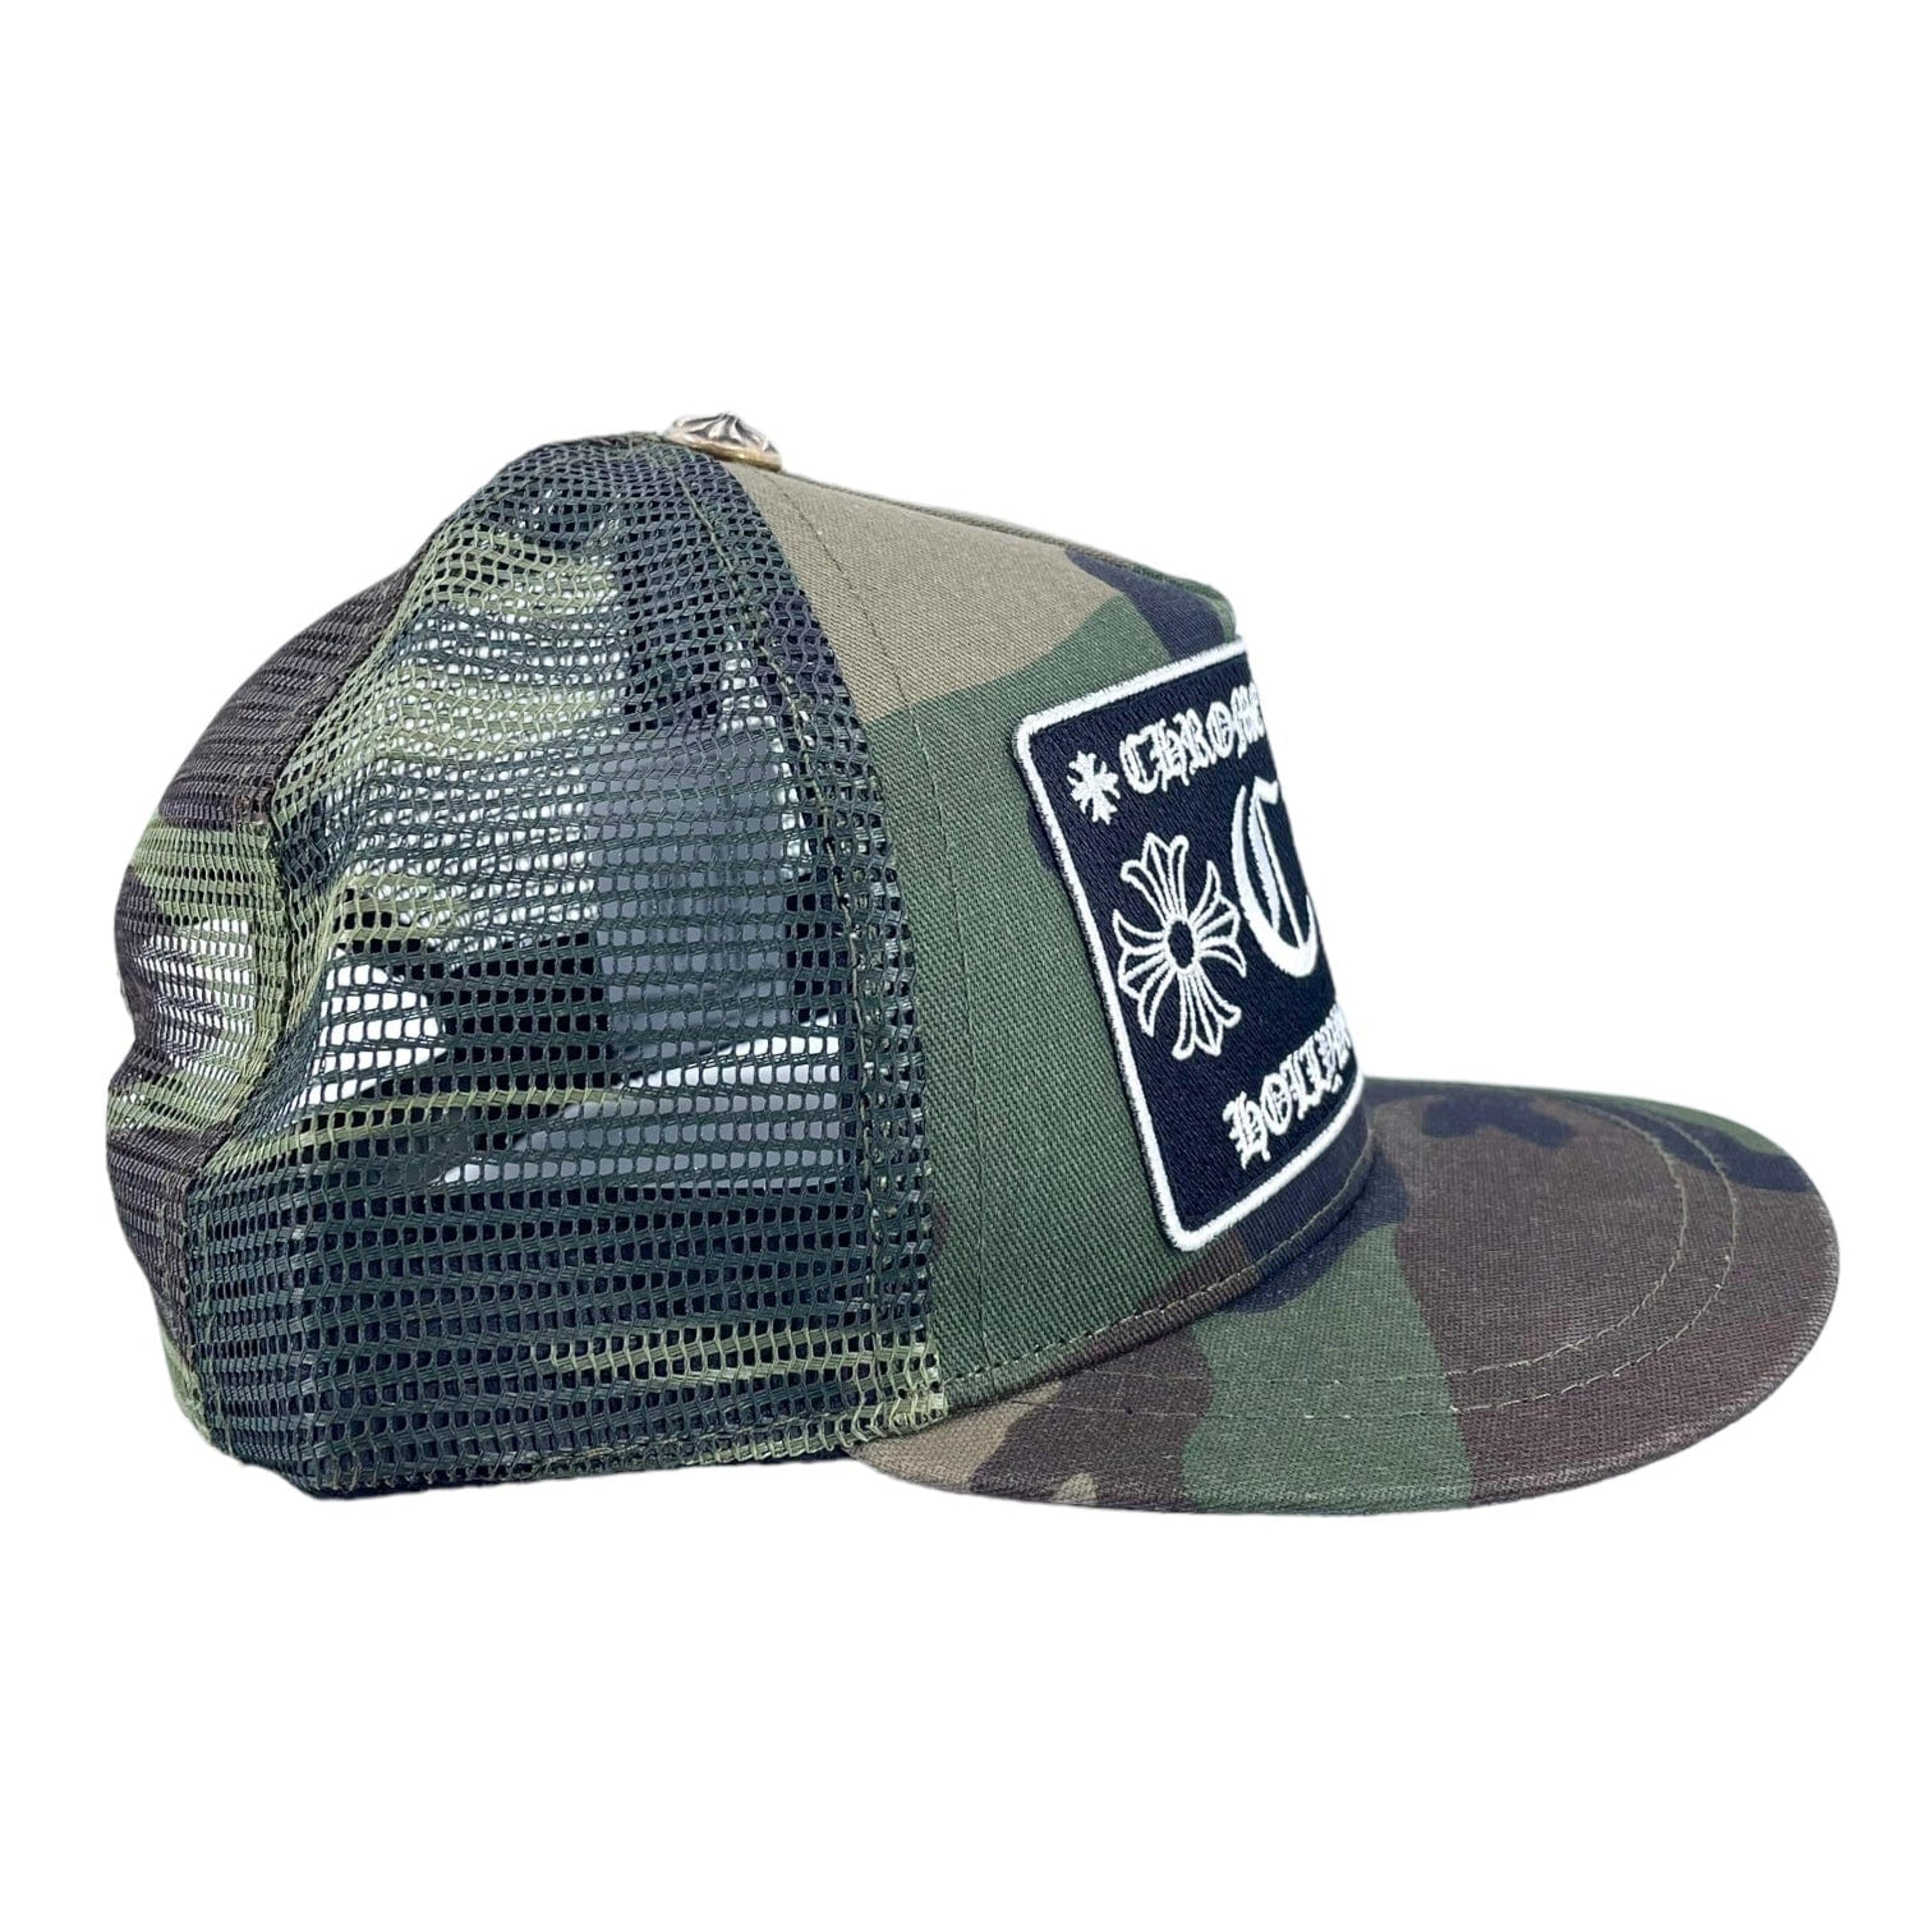 Alternate View 2 of Chrome Hearts CH Hollywood Trucker Hat Camo